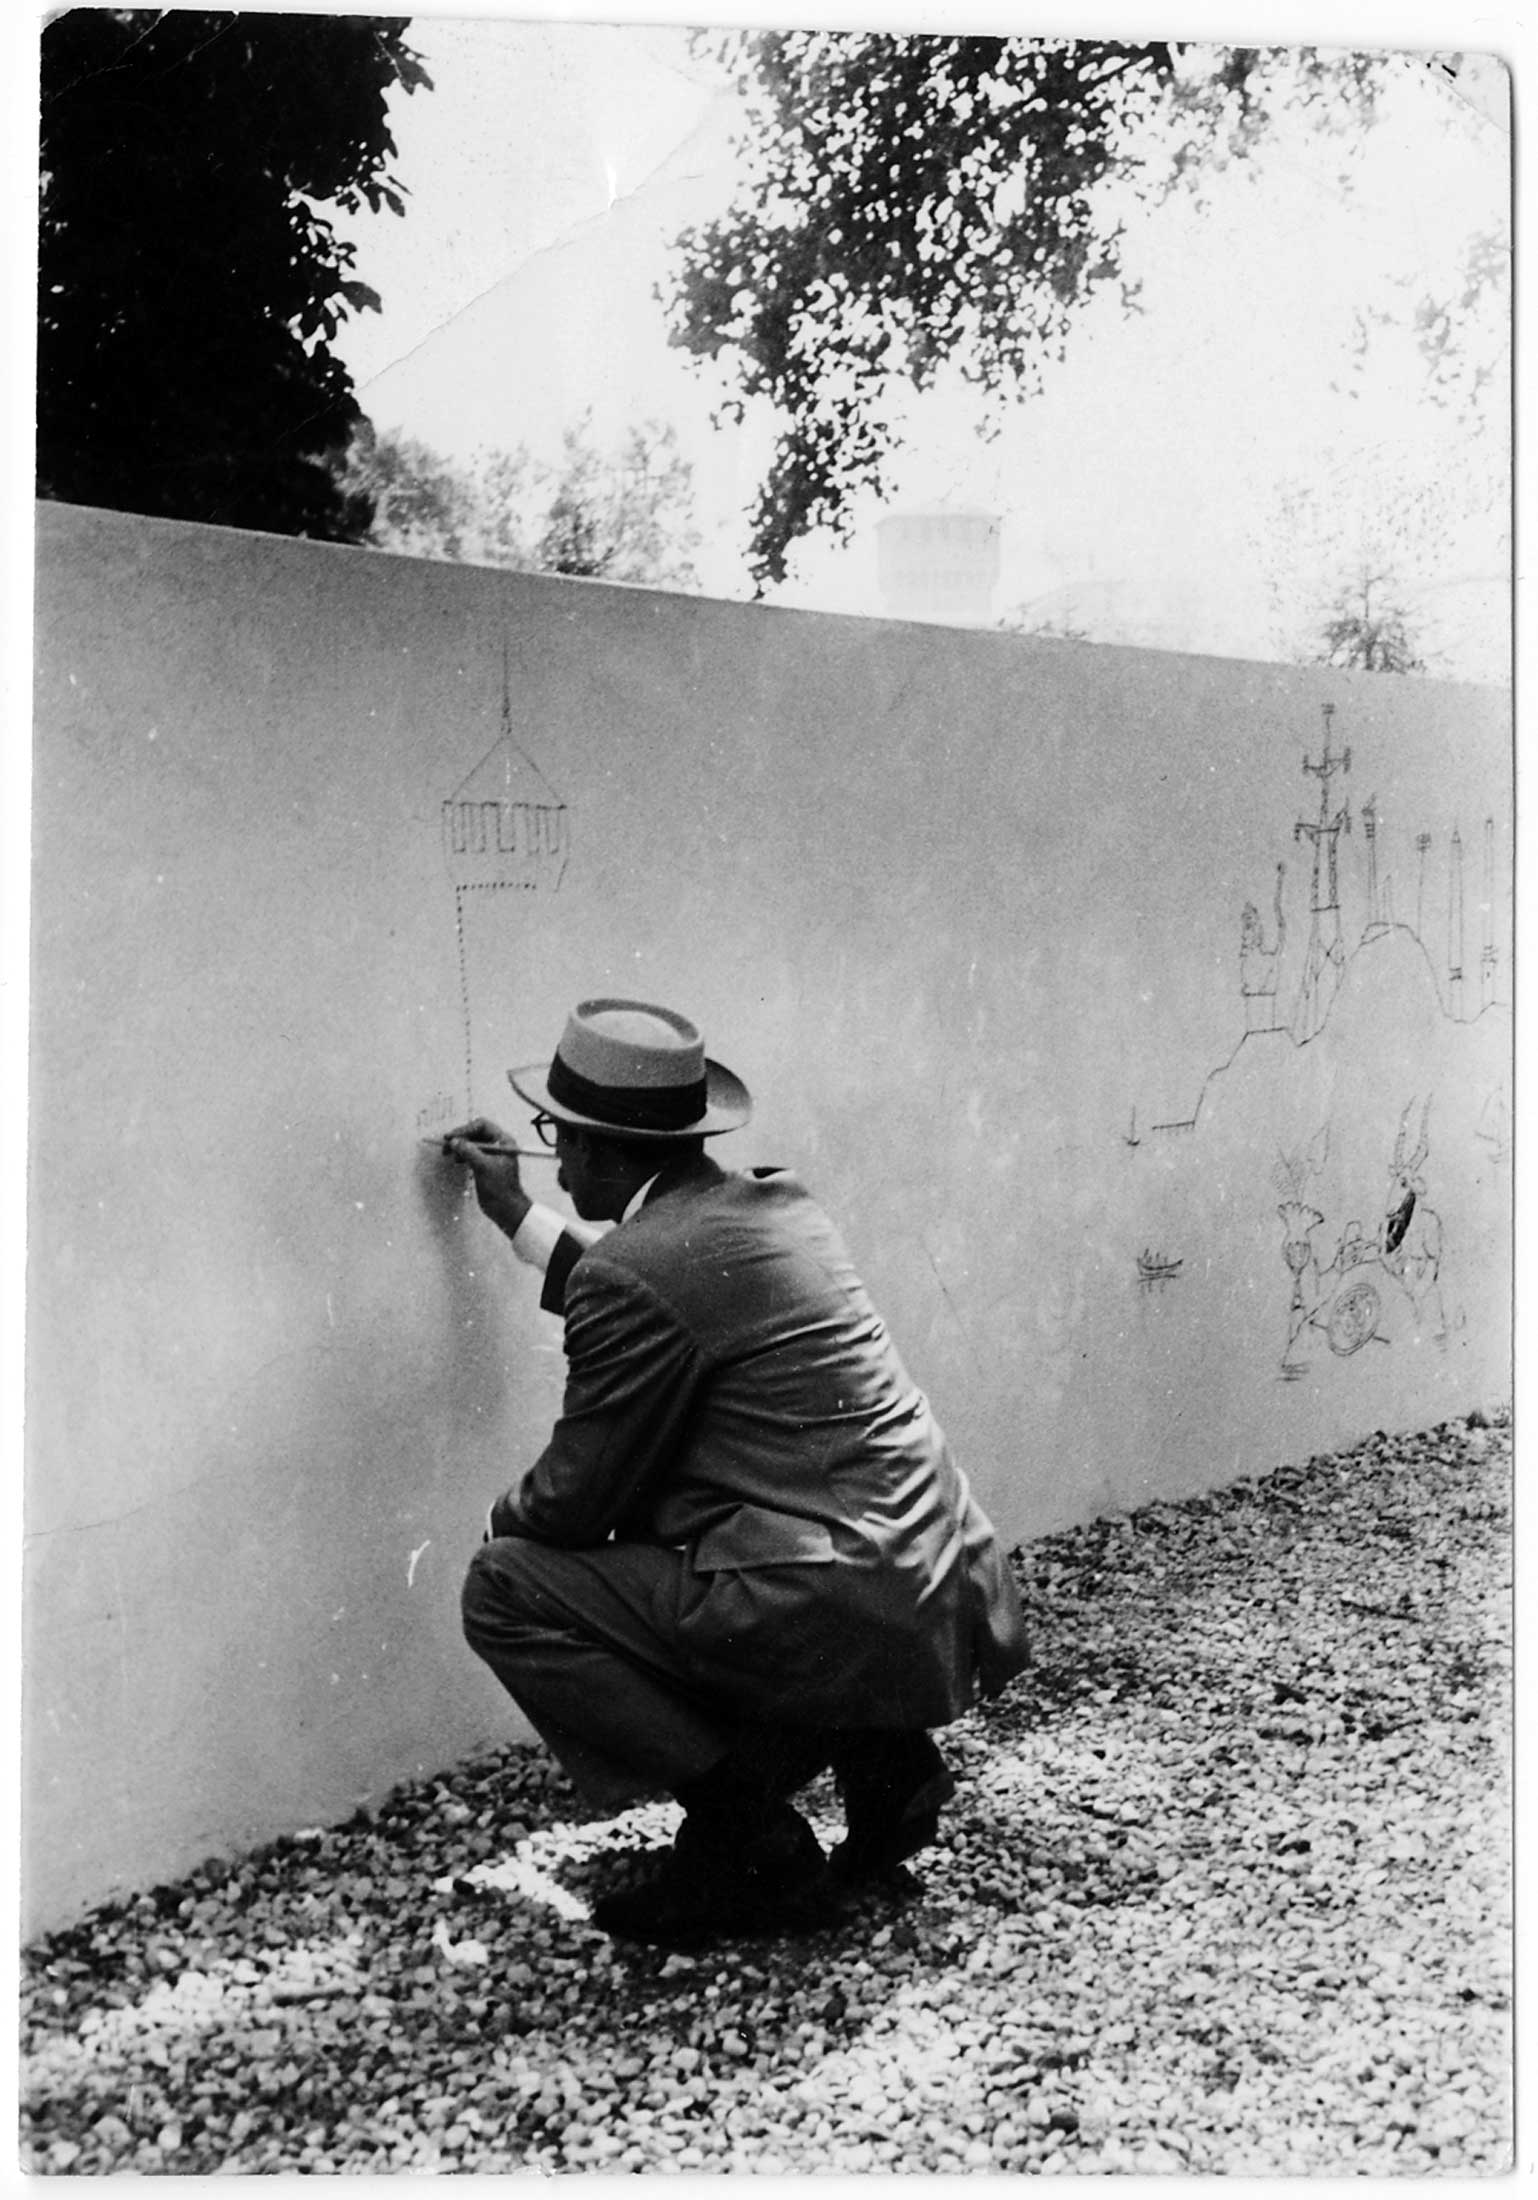 Steinberg adding the Castello Sforzesco to the wall of the “Children’s Labyrinth,” August 1954.